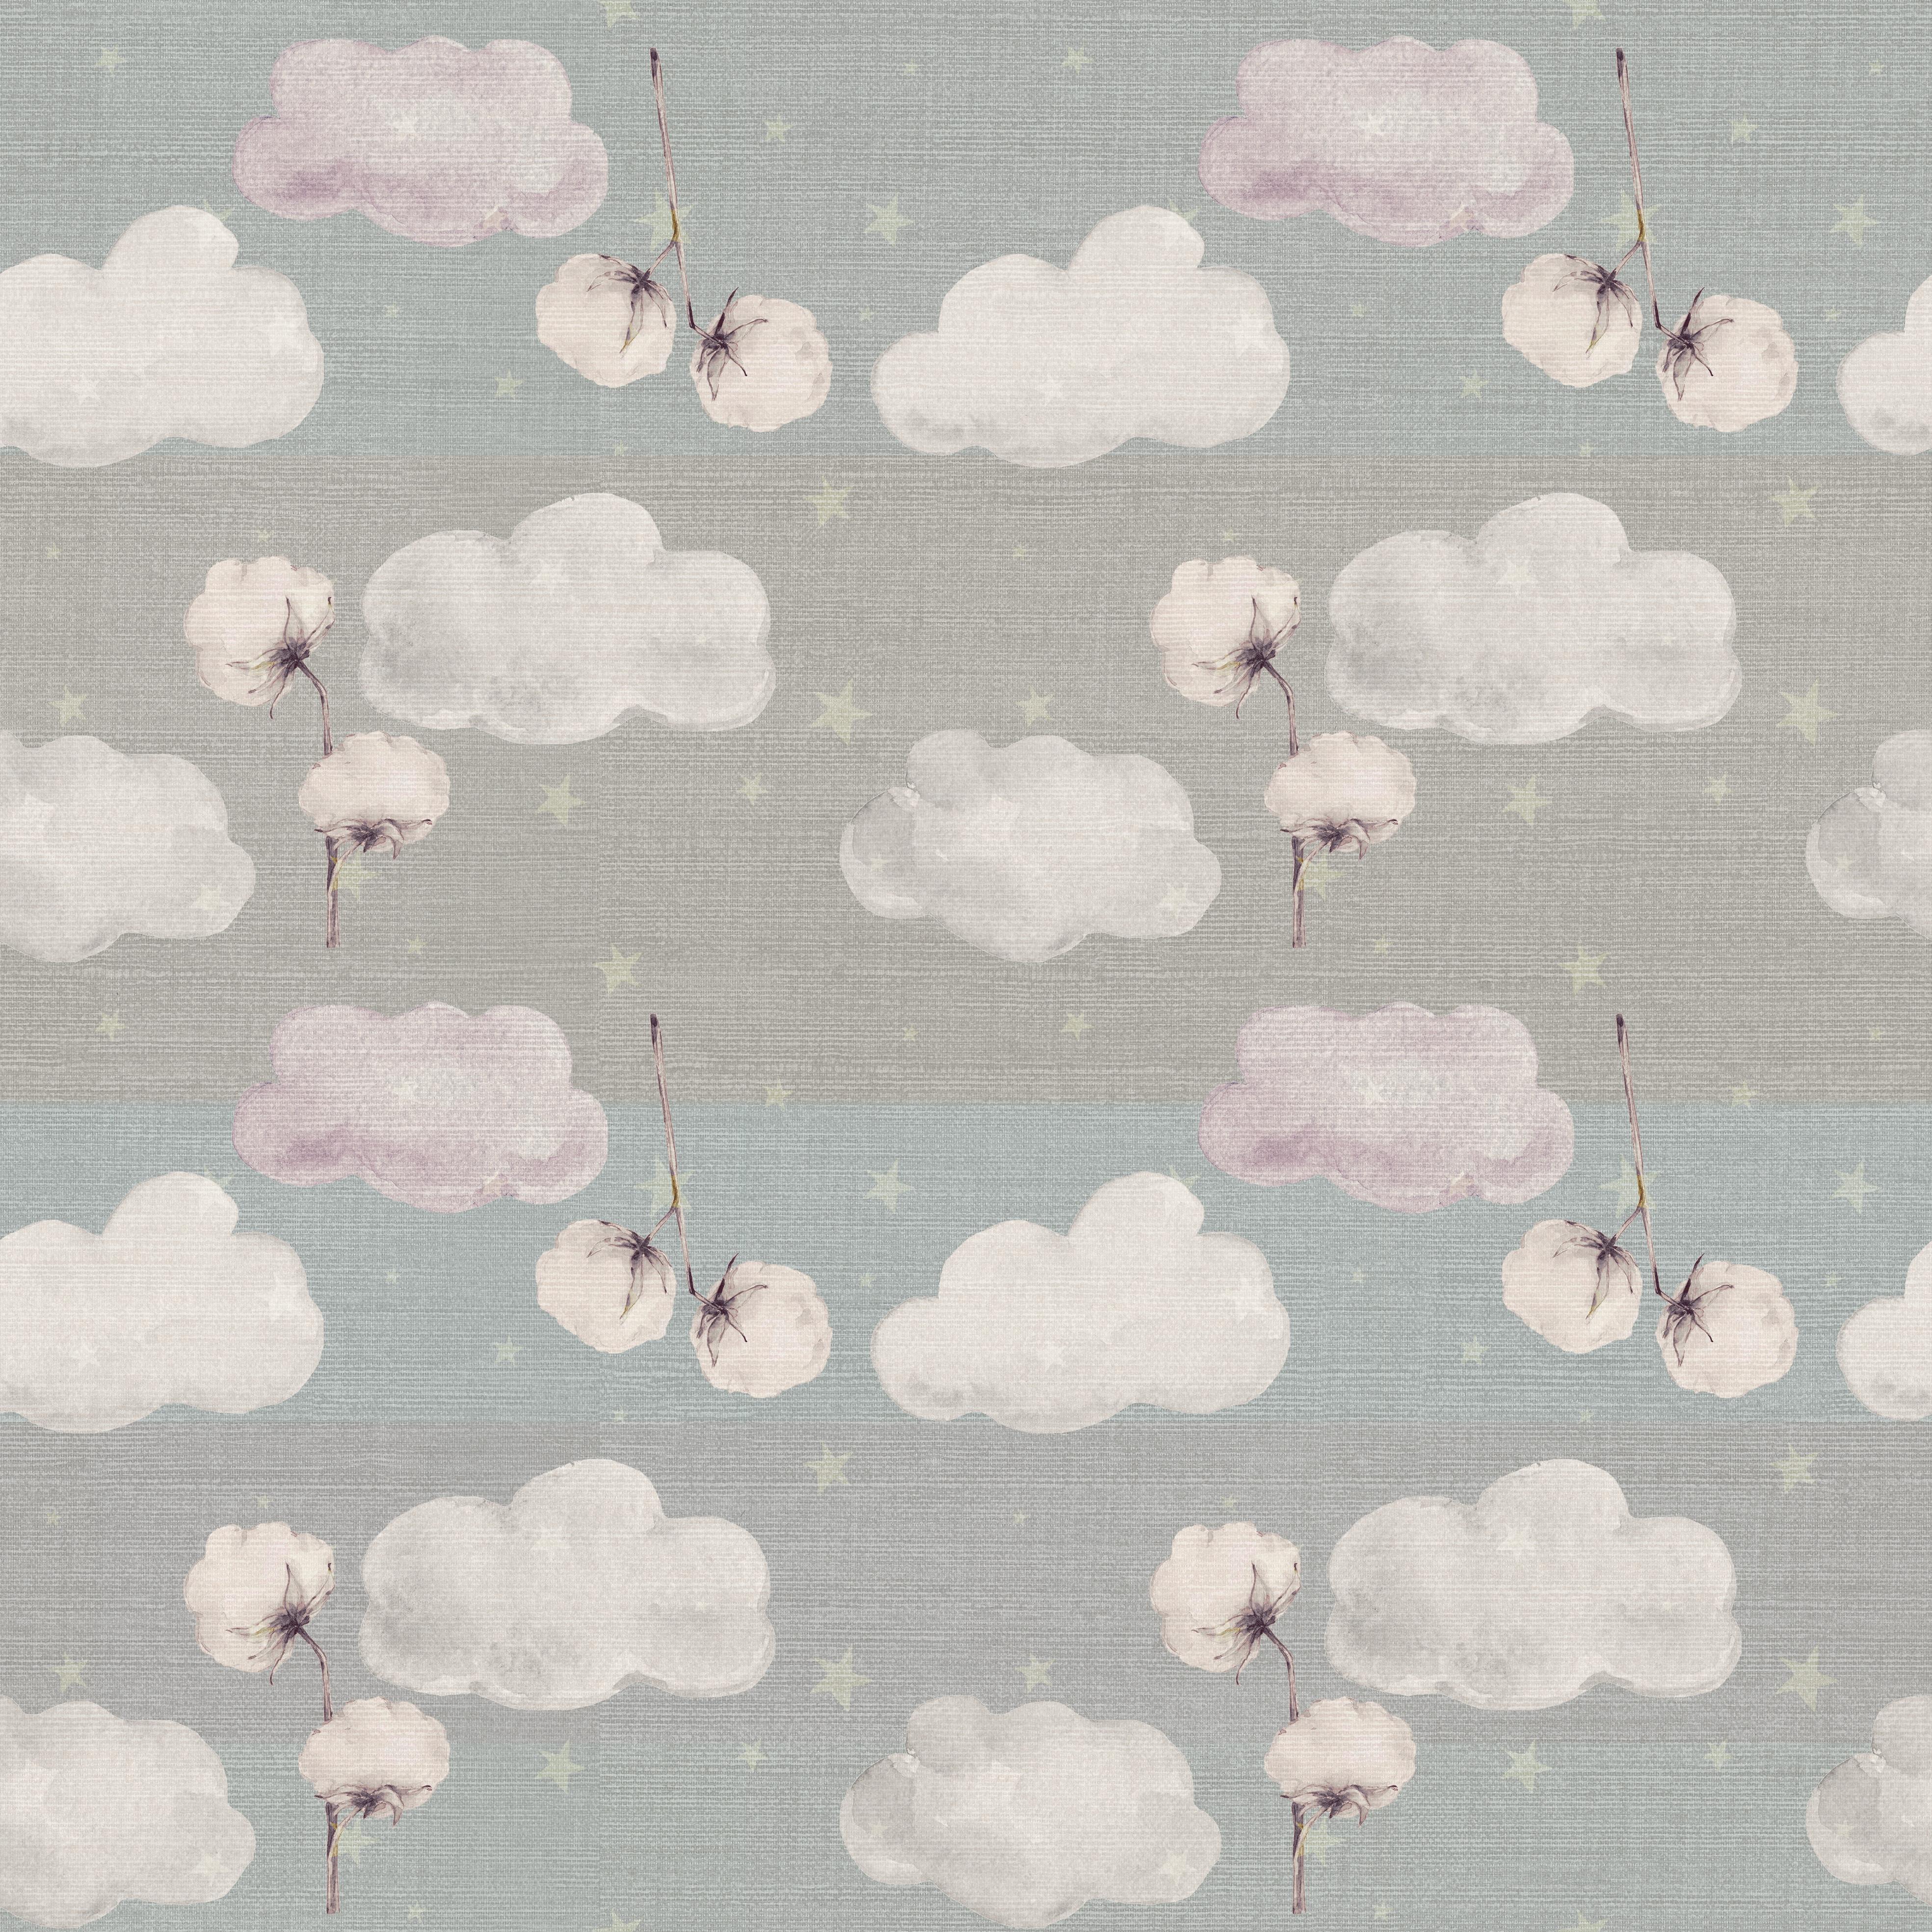 Paper Ornami Children cotton fluffy Vinyl Wallpaper Made in Italy Digital Printing For Sale